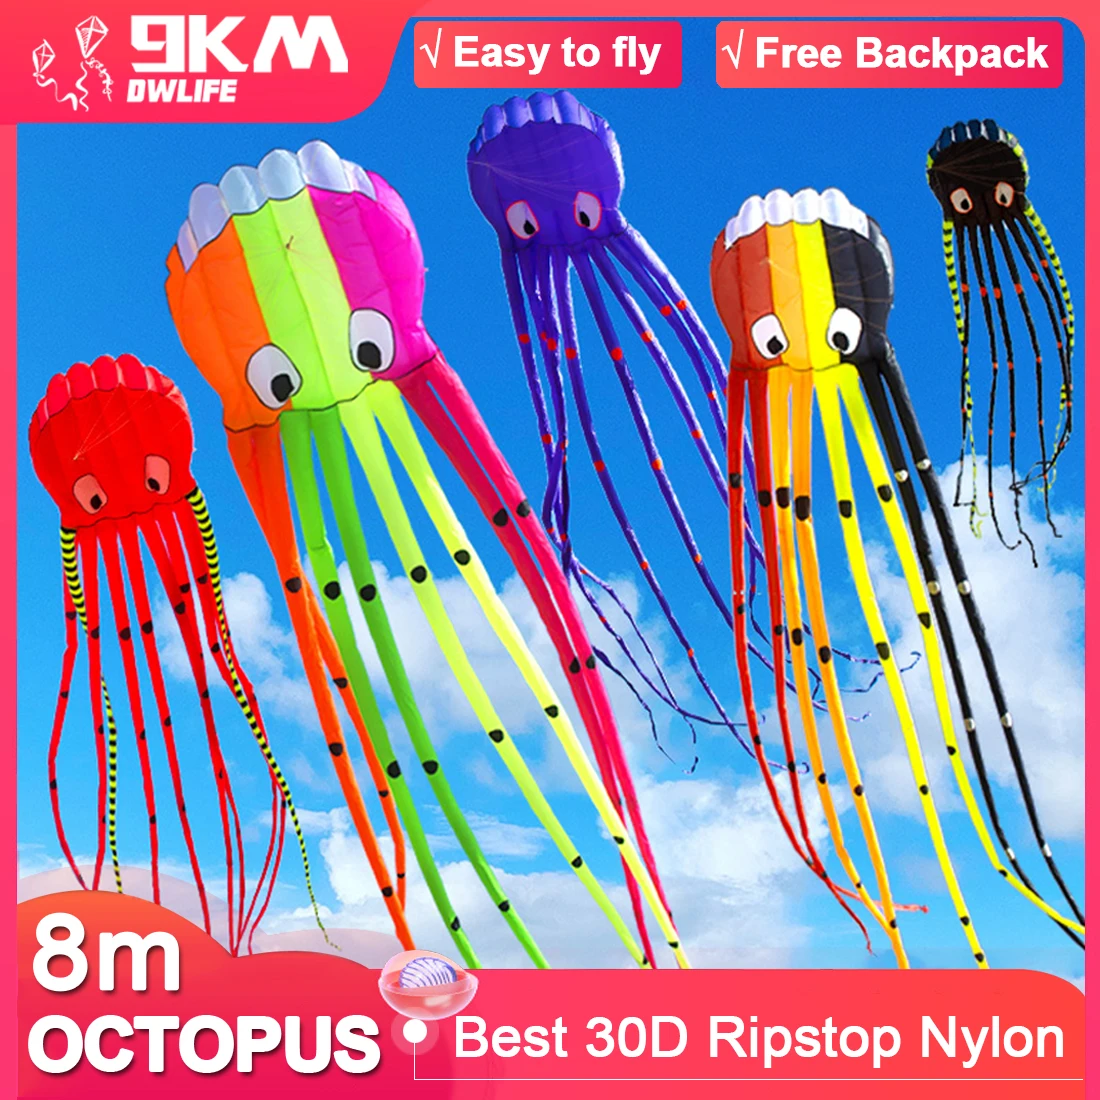 9km-13color-big-octopus-kite-8m-large-single-line-soft-inflatable-kite-30d-ripstop-polyester-fabric-with-bag